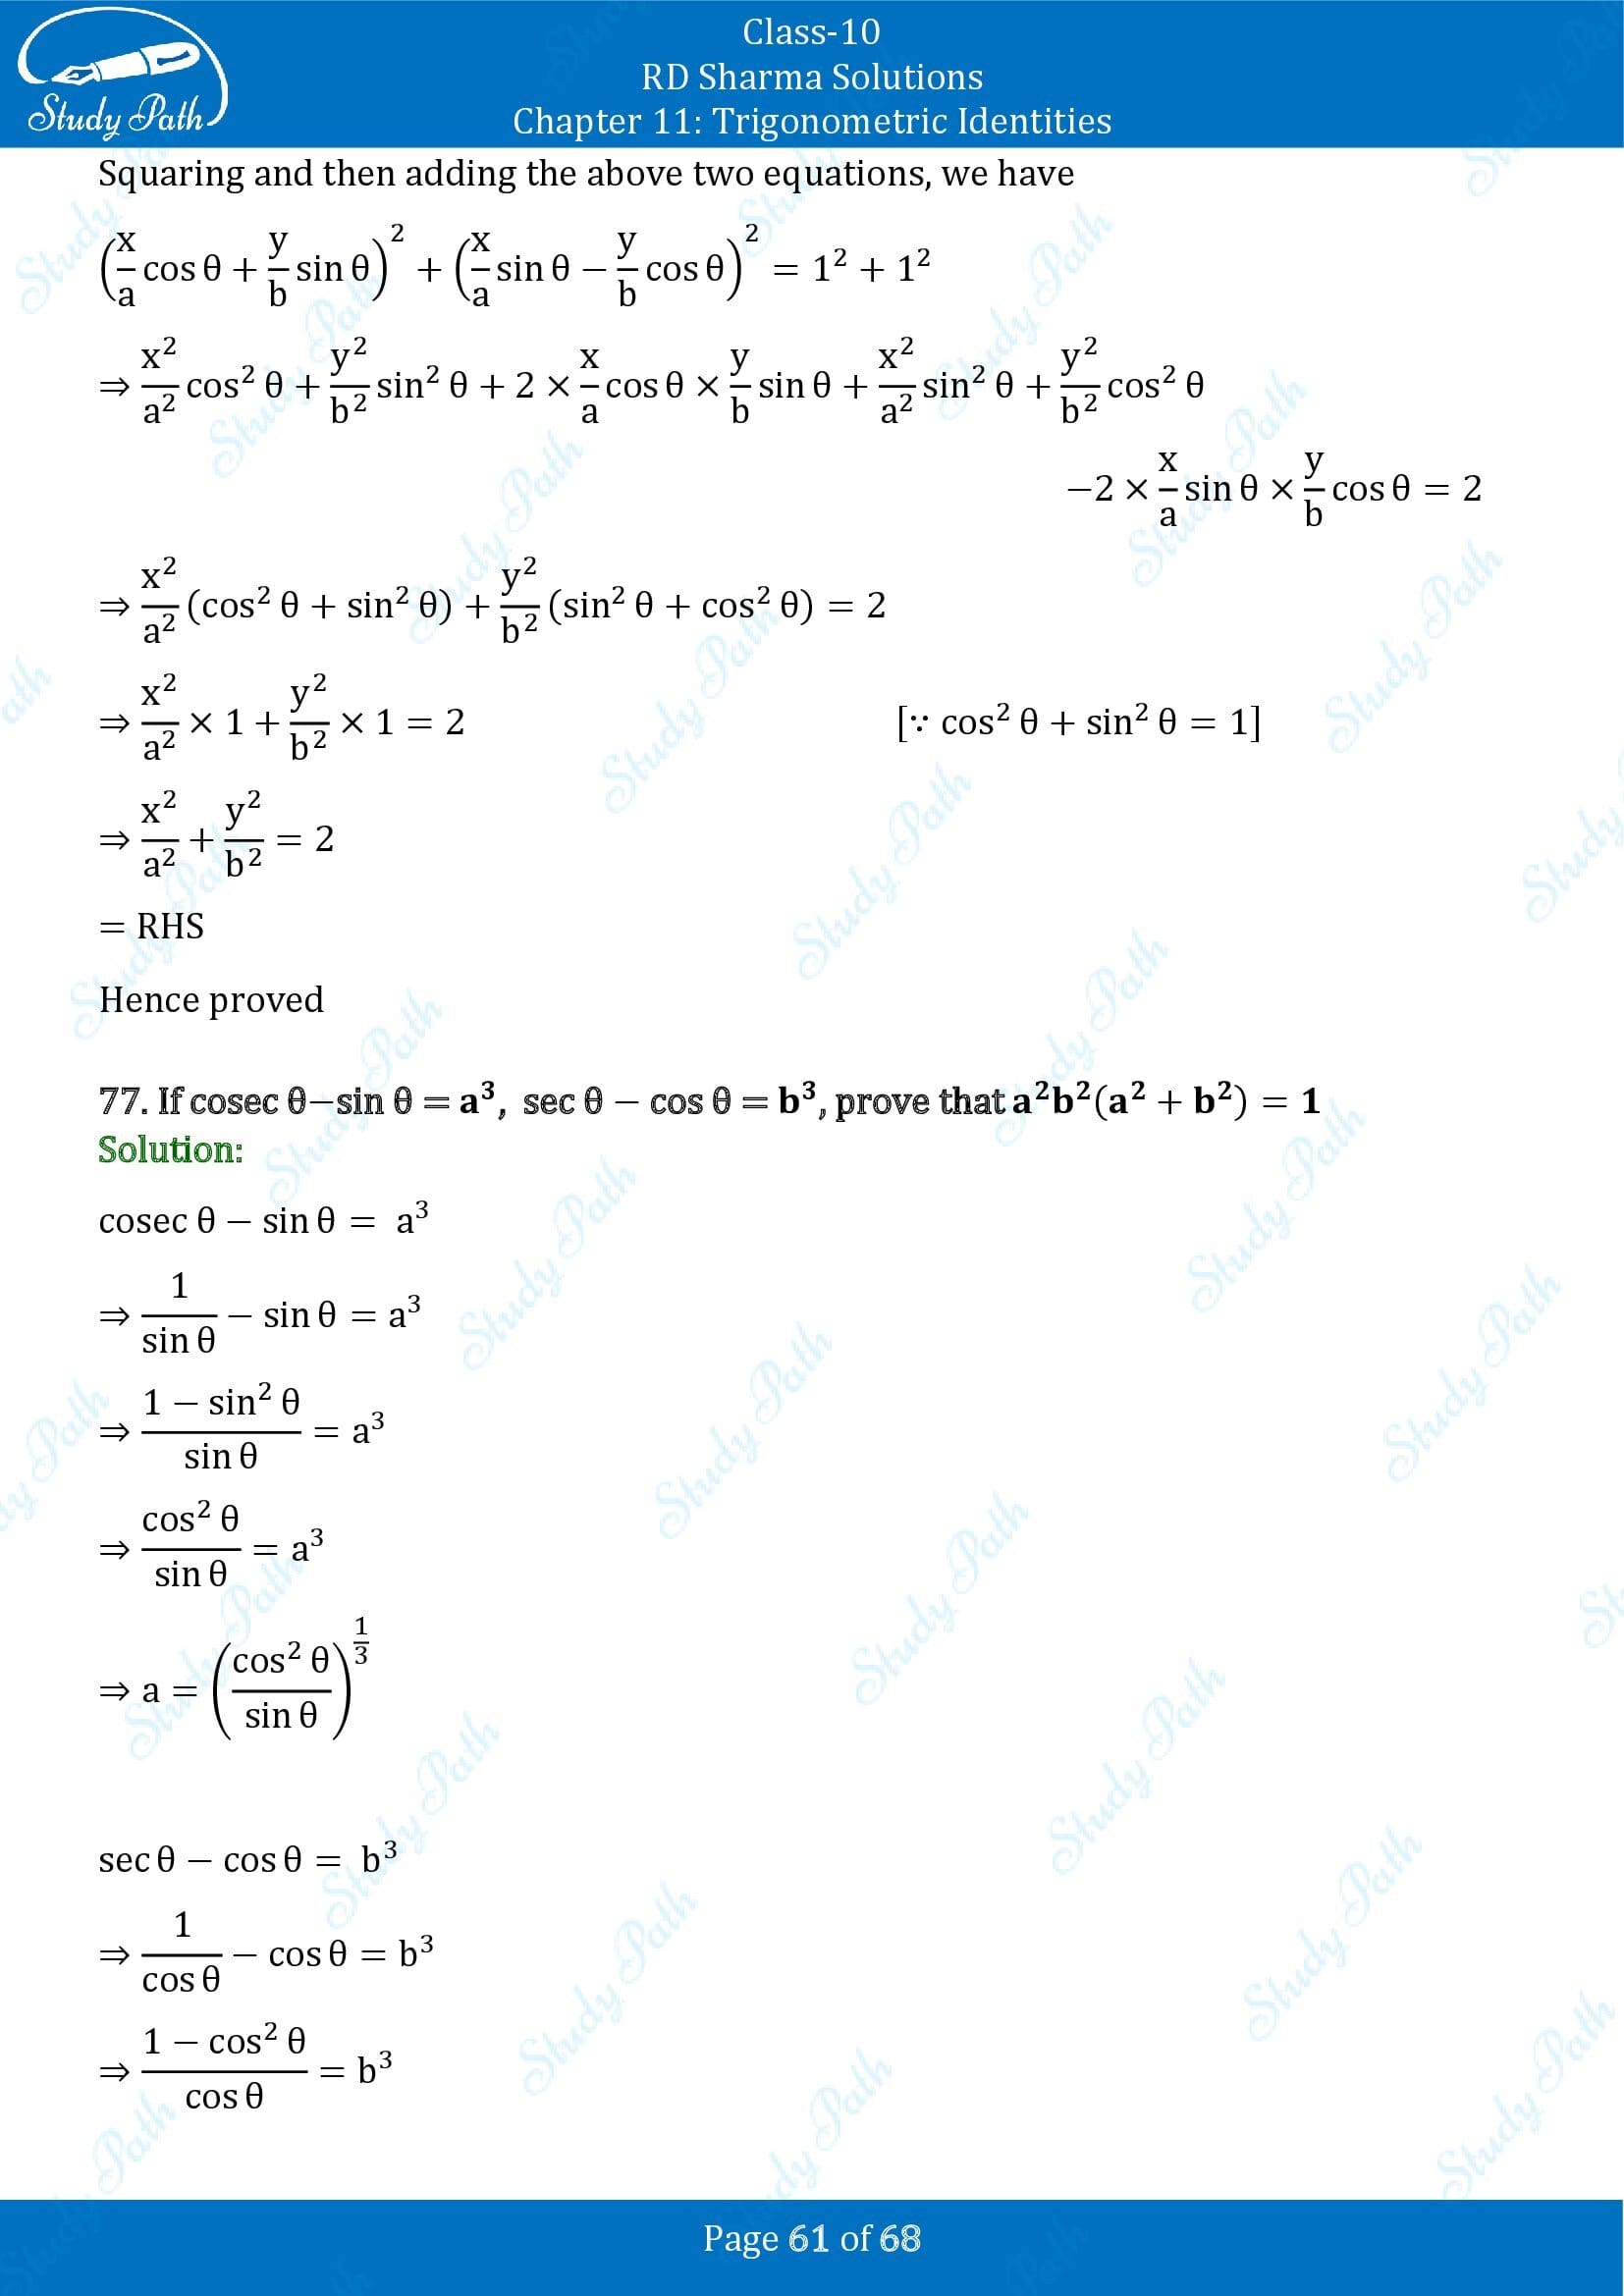 RD Sharma Solutions Class 10 Chapter 11 Trigonometric Identities Exercise 11.1 00061